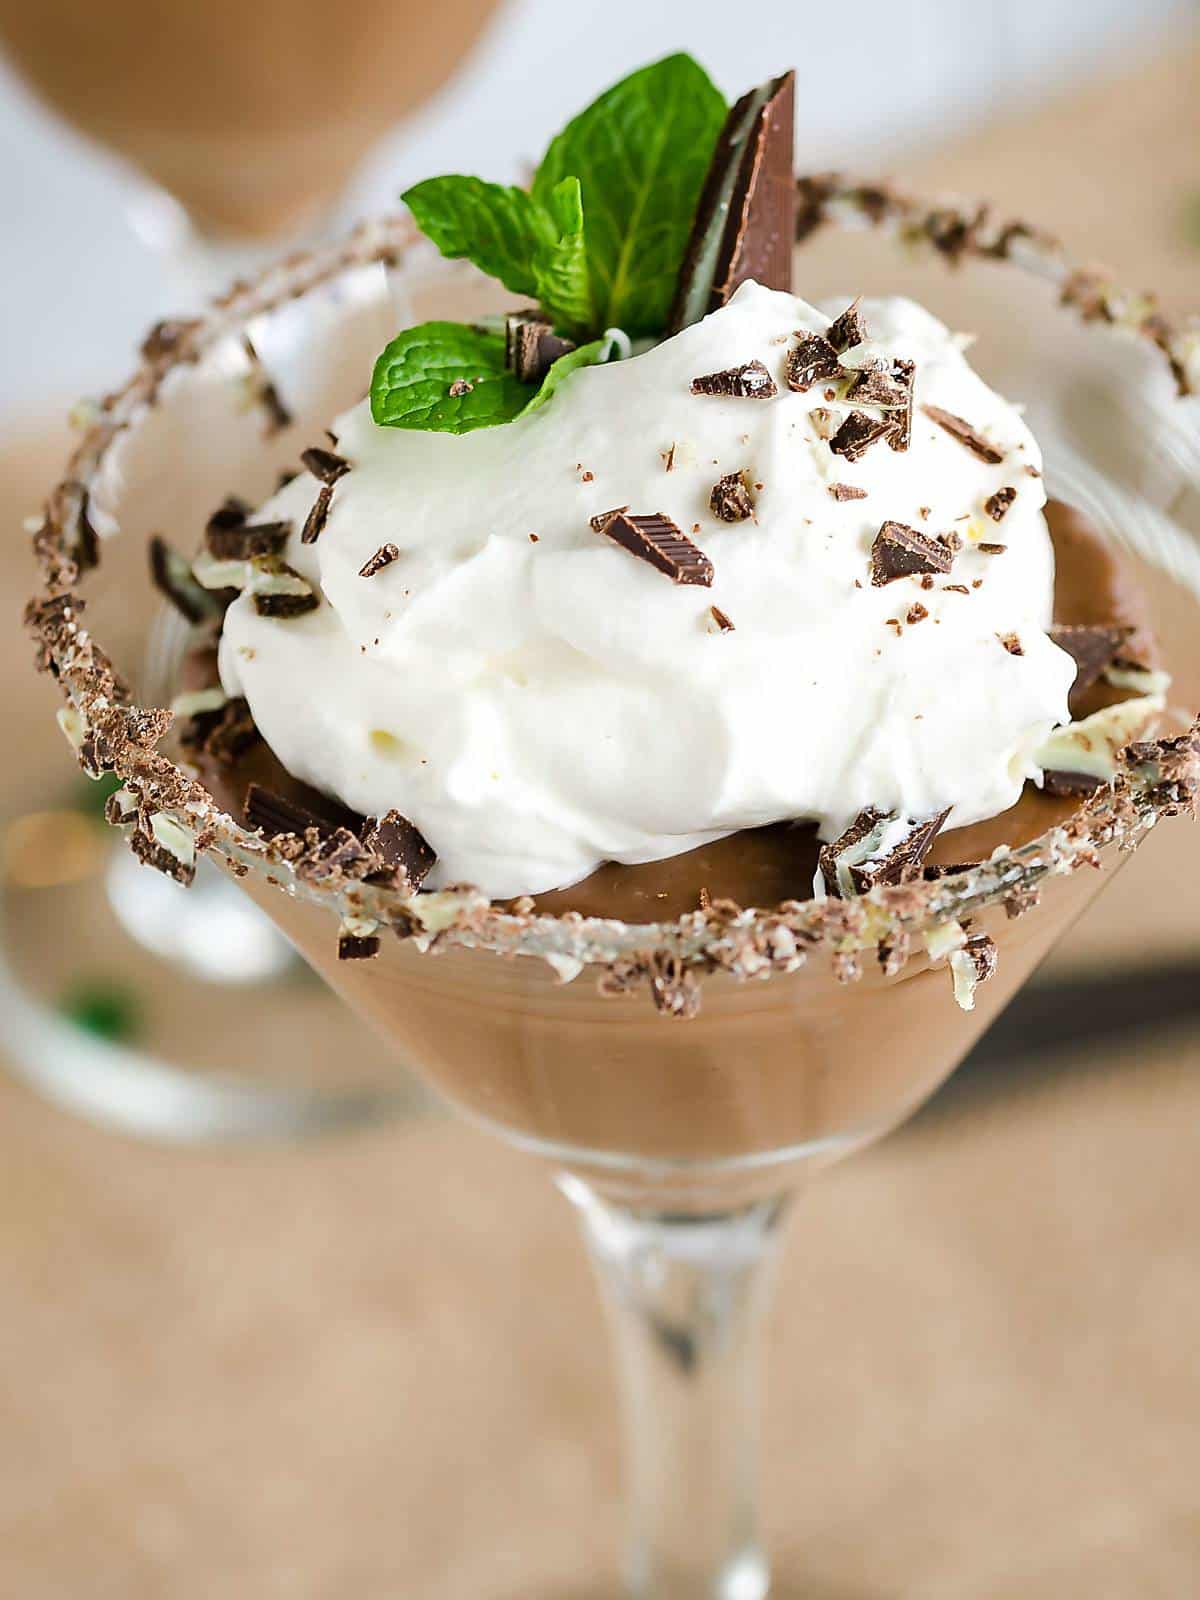 homemade bittersweet pudding in a martini glass, garnished with whipped cream, Ande's mints and mint leaf